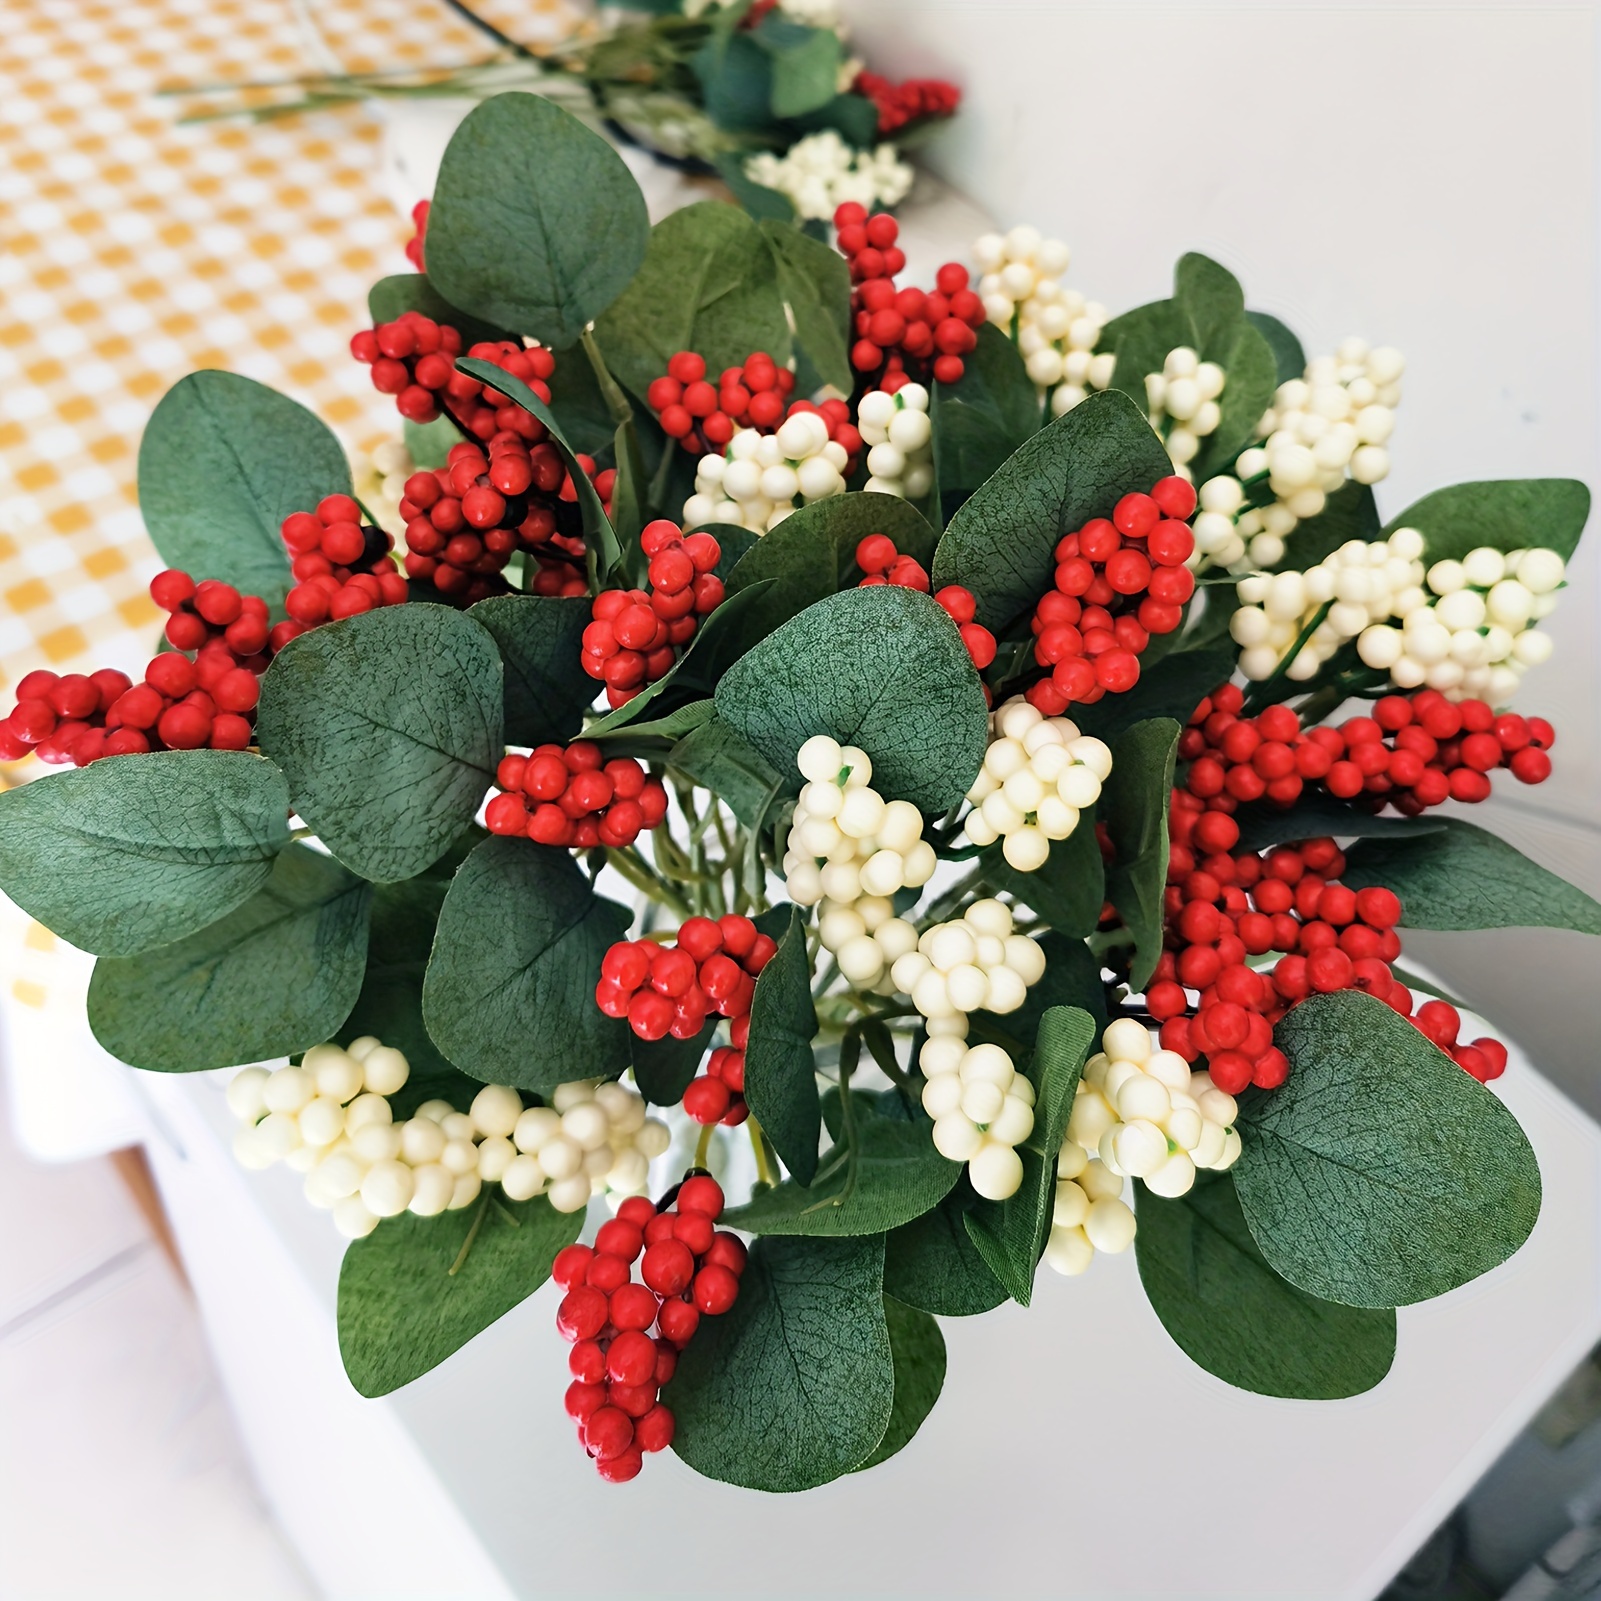 Holly Berries Branches For Christmas Tree Decorations – BlessMyBucket